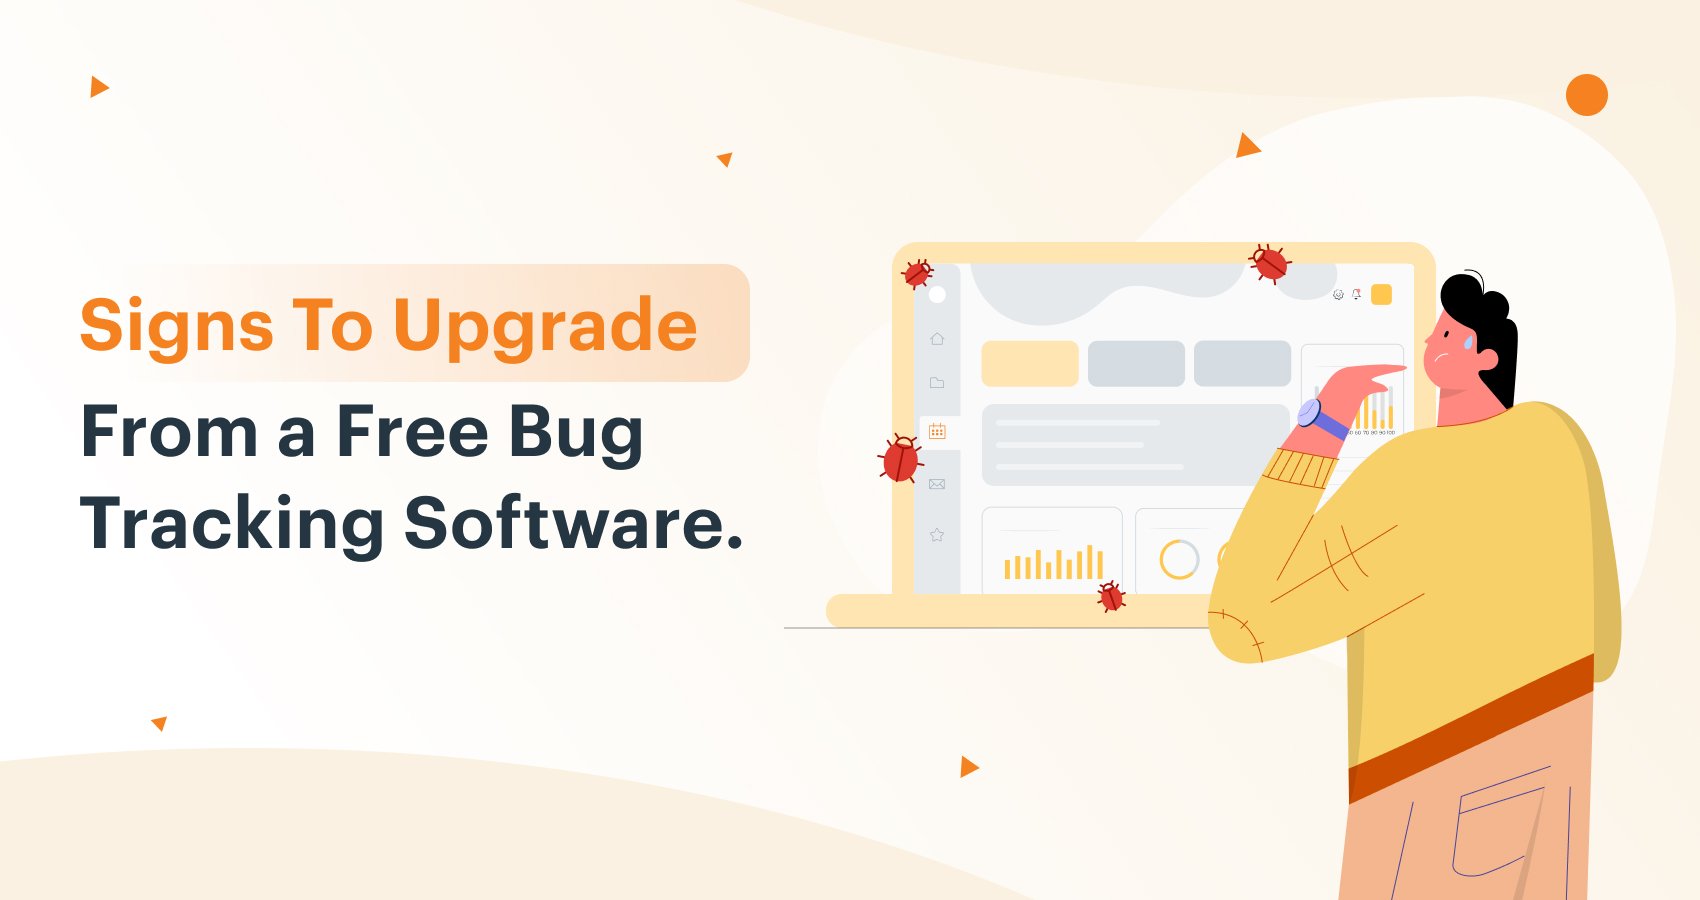 Signs to Upgrade from a Free Bug Tracking Software